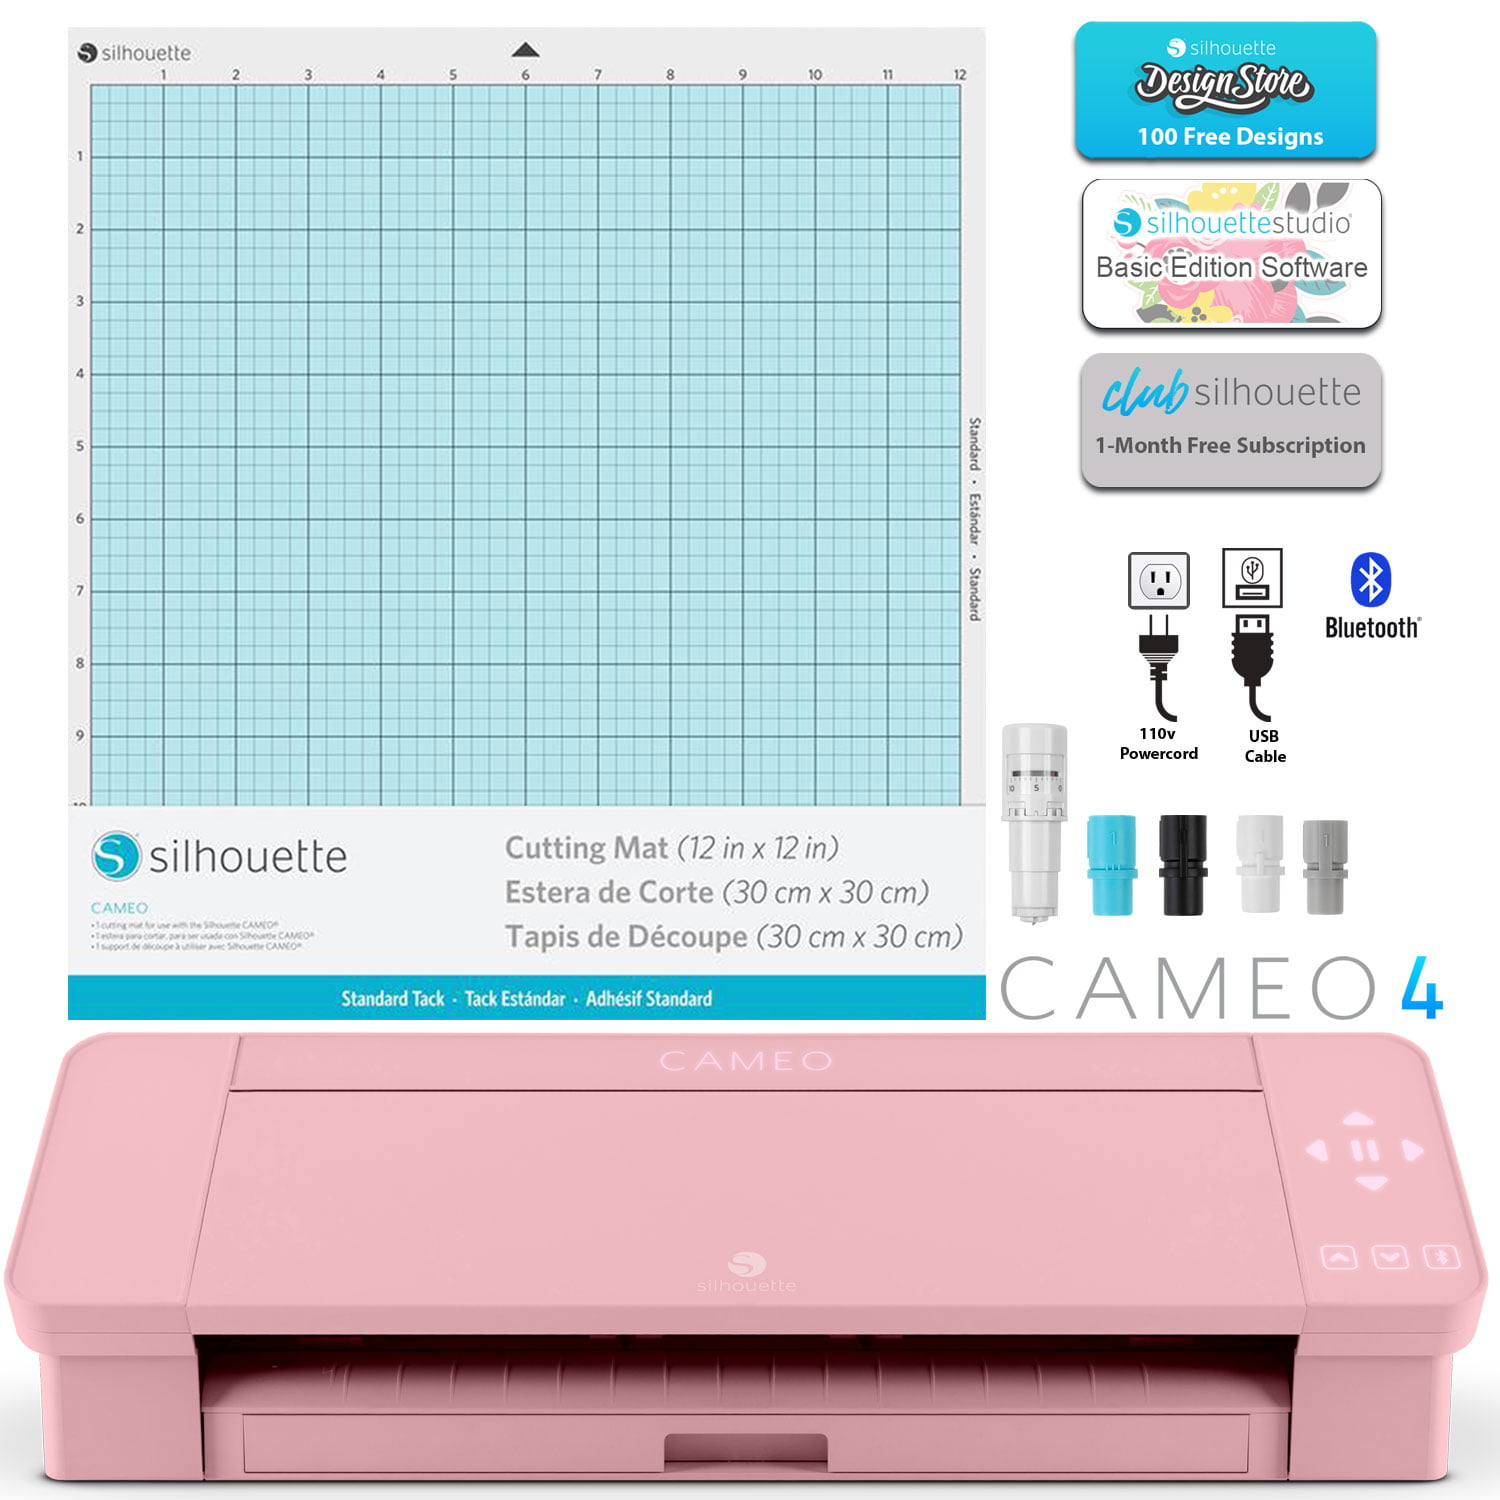 Silhouette Cameo 4 Pink Bundle with Vinyl Starter Kit 2 Autoblade 2 CC Vinyl Tool Kit Tutorials and Access to Ebooks 120 Heat Transfer Starter Kit Classes 24 Pack of Pens 